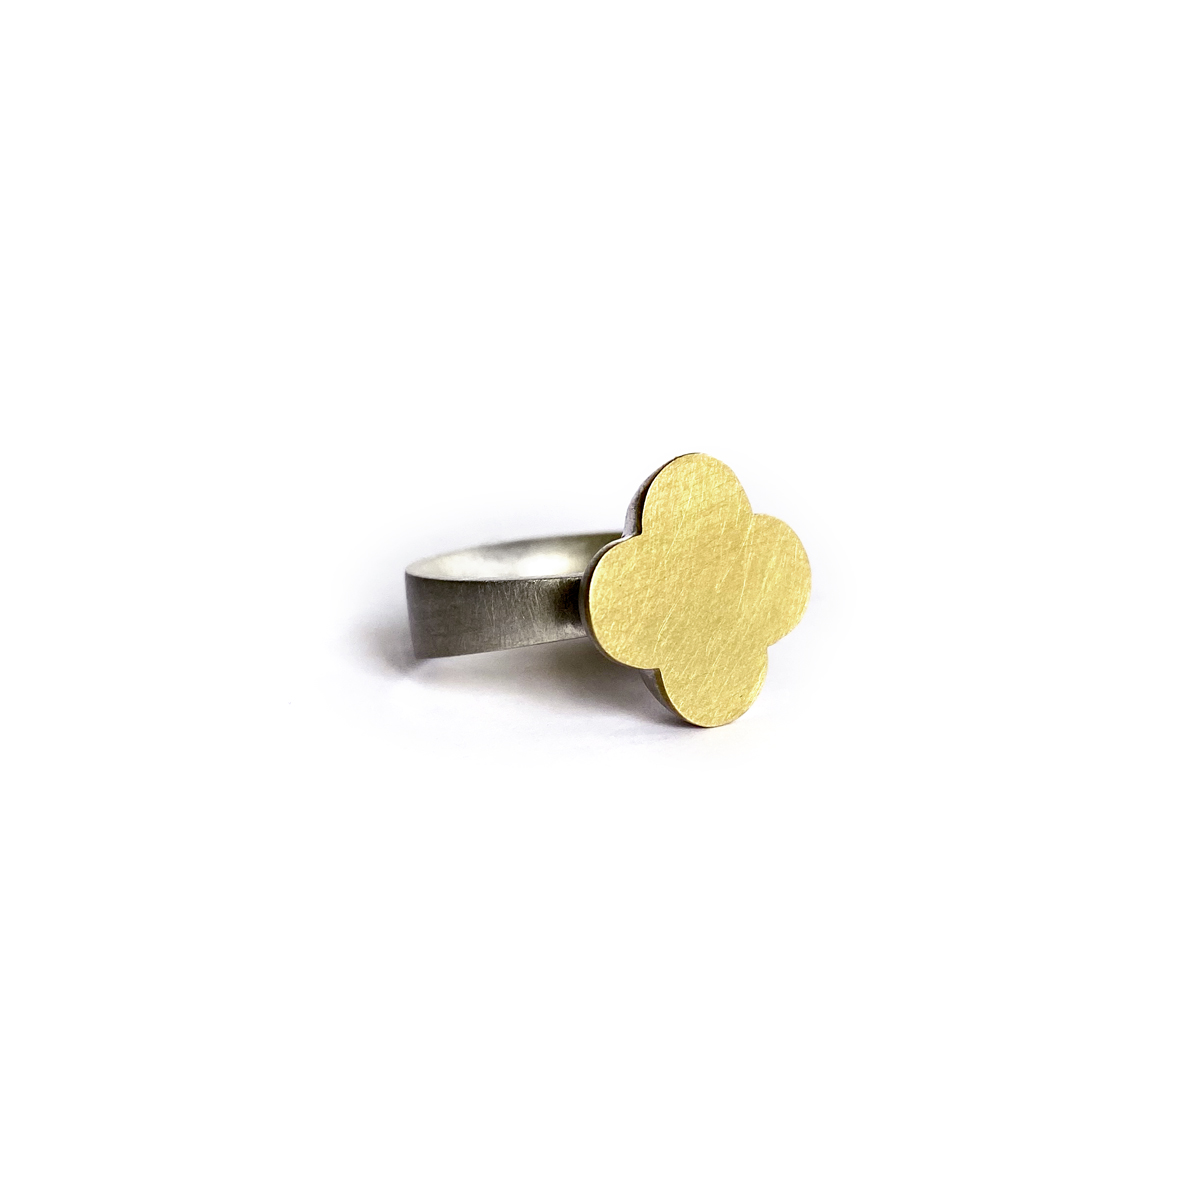 Reverence Ring (large), sterling silver, 18ct gold, 2020, Kate Alterio